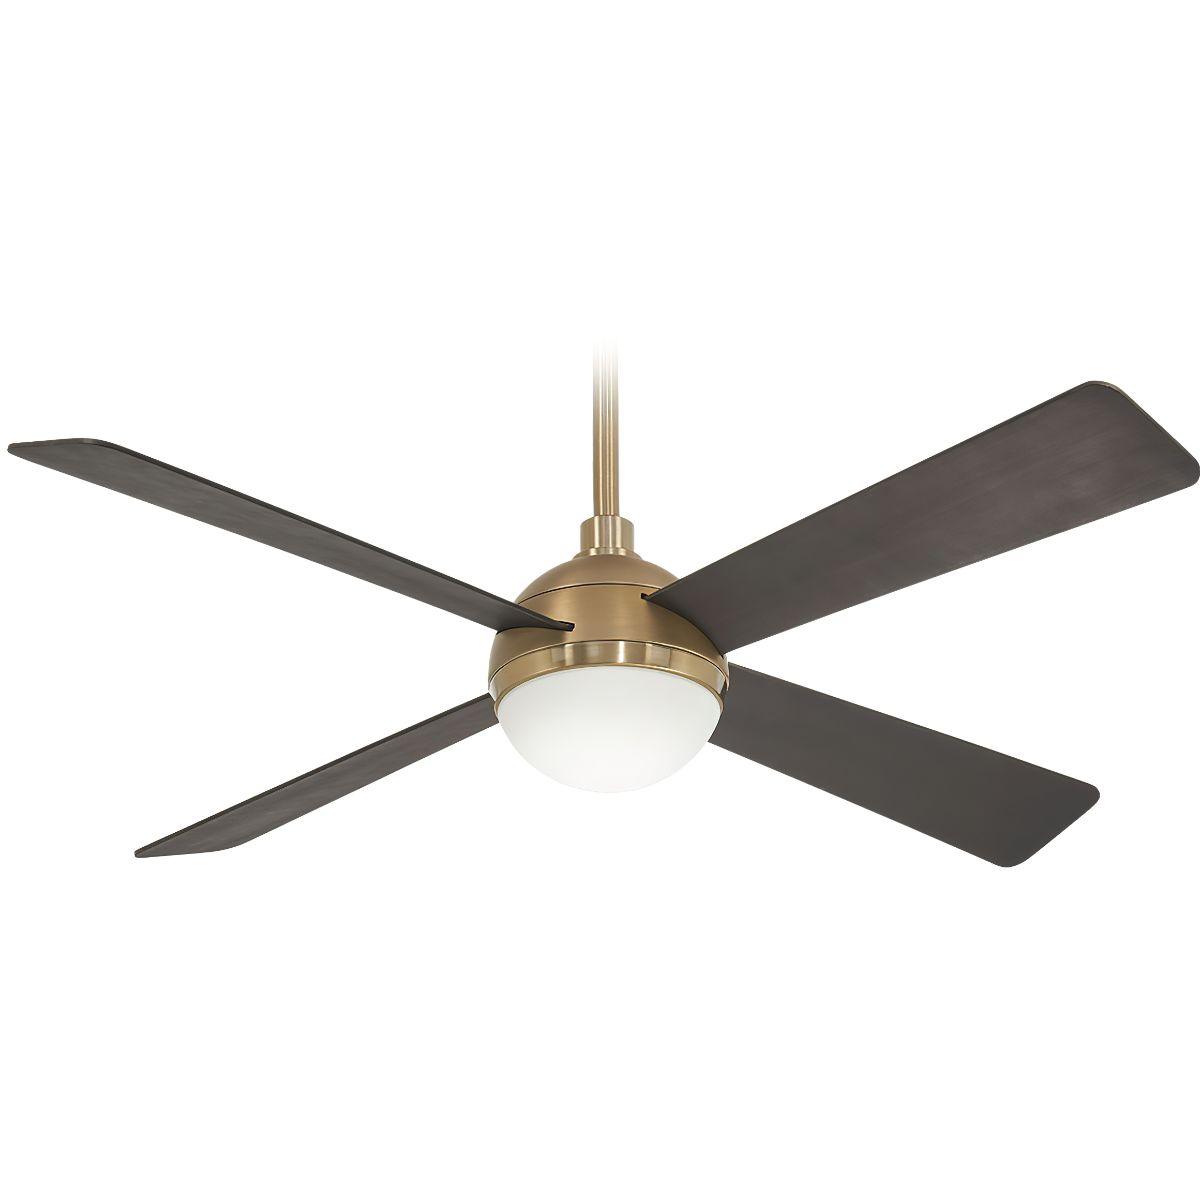 Orb 54 Inch Modern Ceiling Fan With Light And Remote